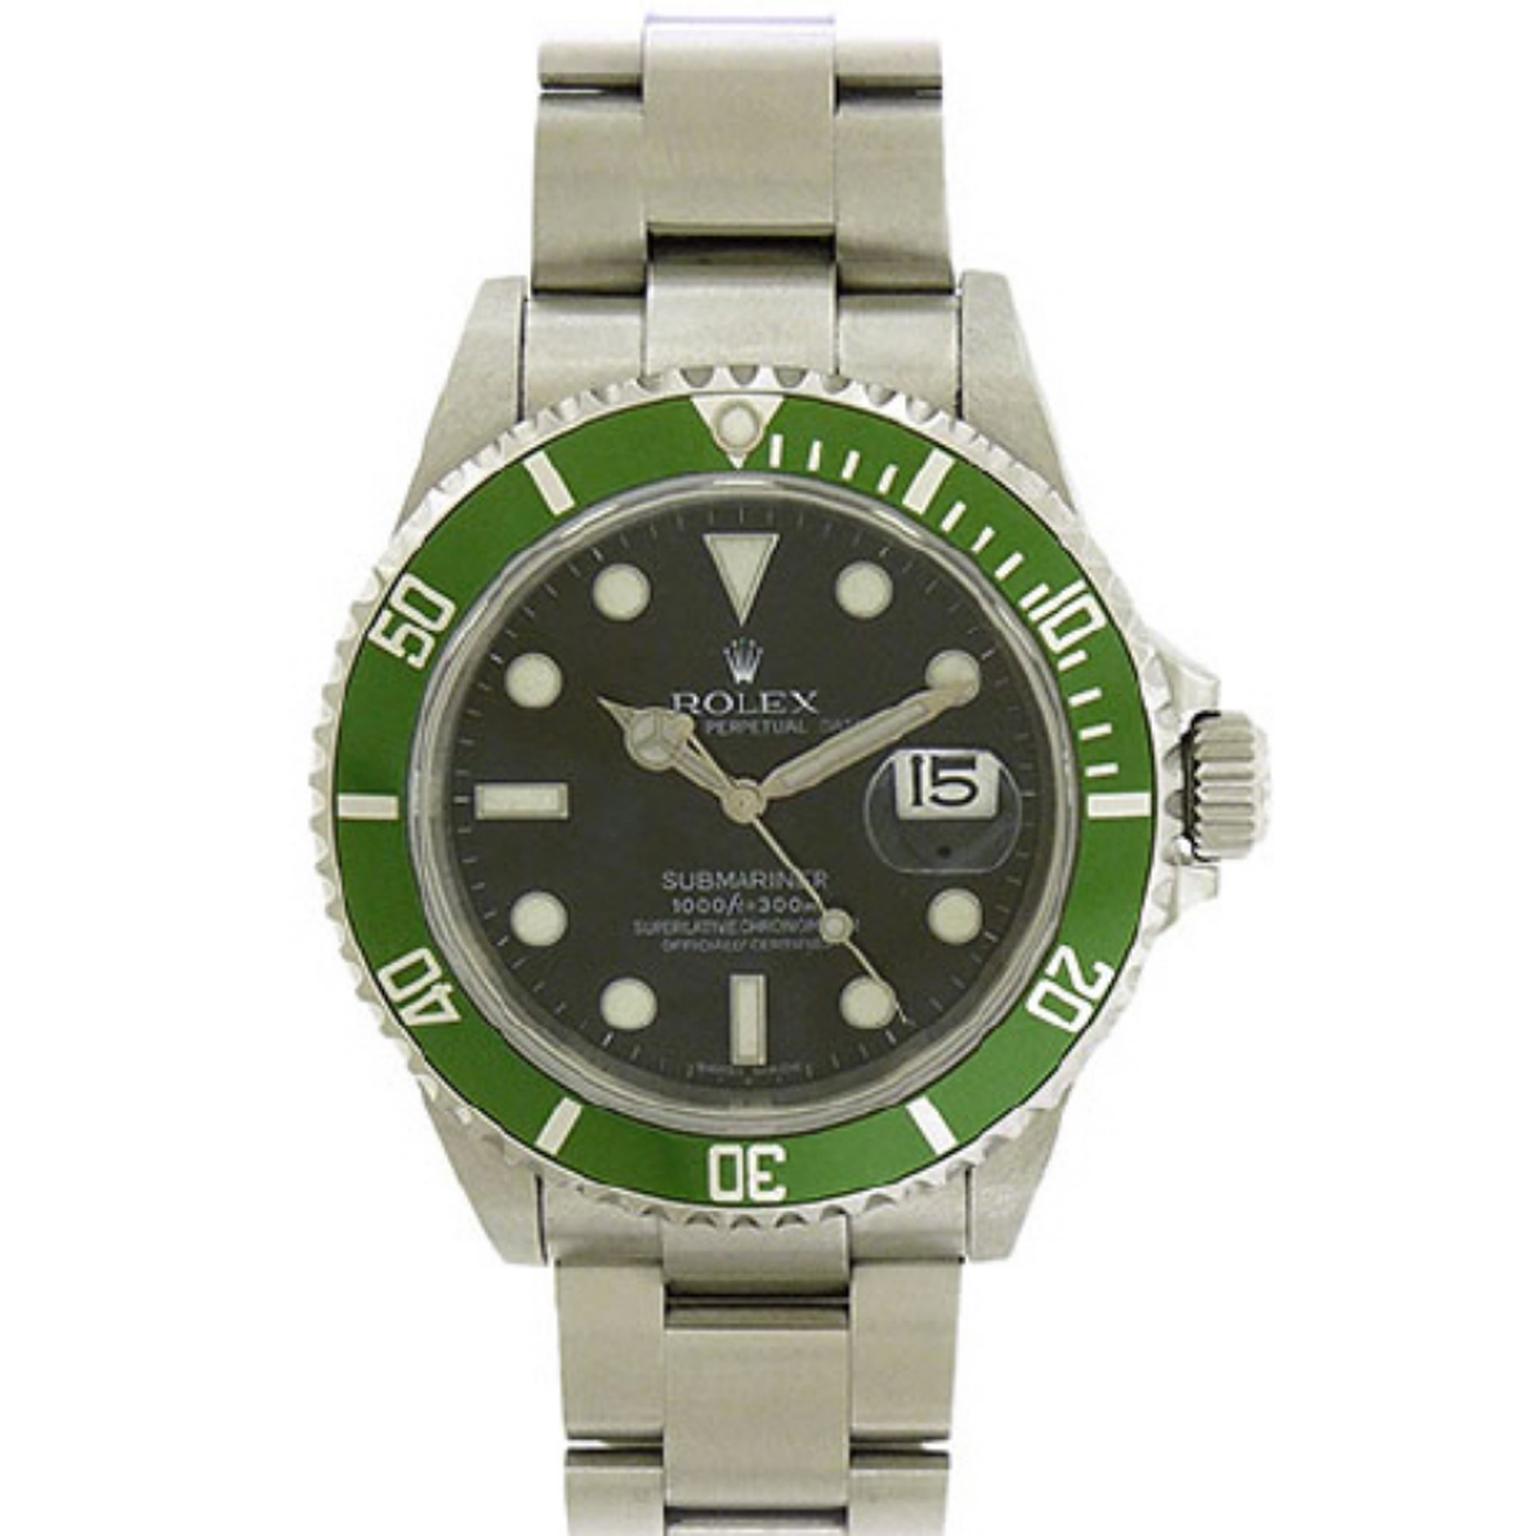 50th anniversary Rolex Submariner watch from the Aaron Faber Gallery